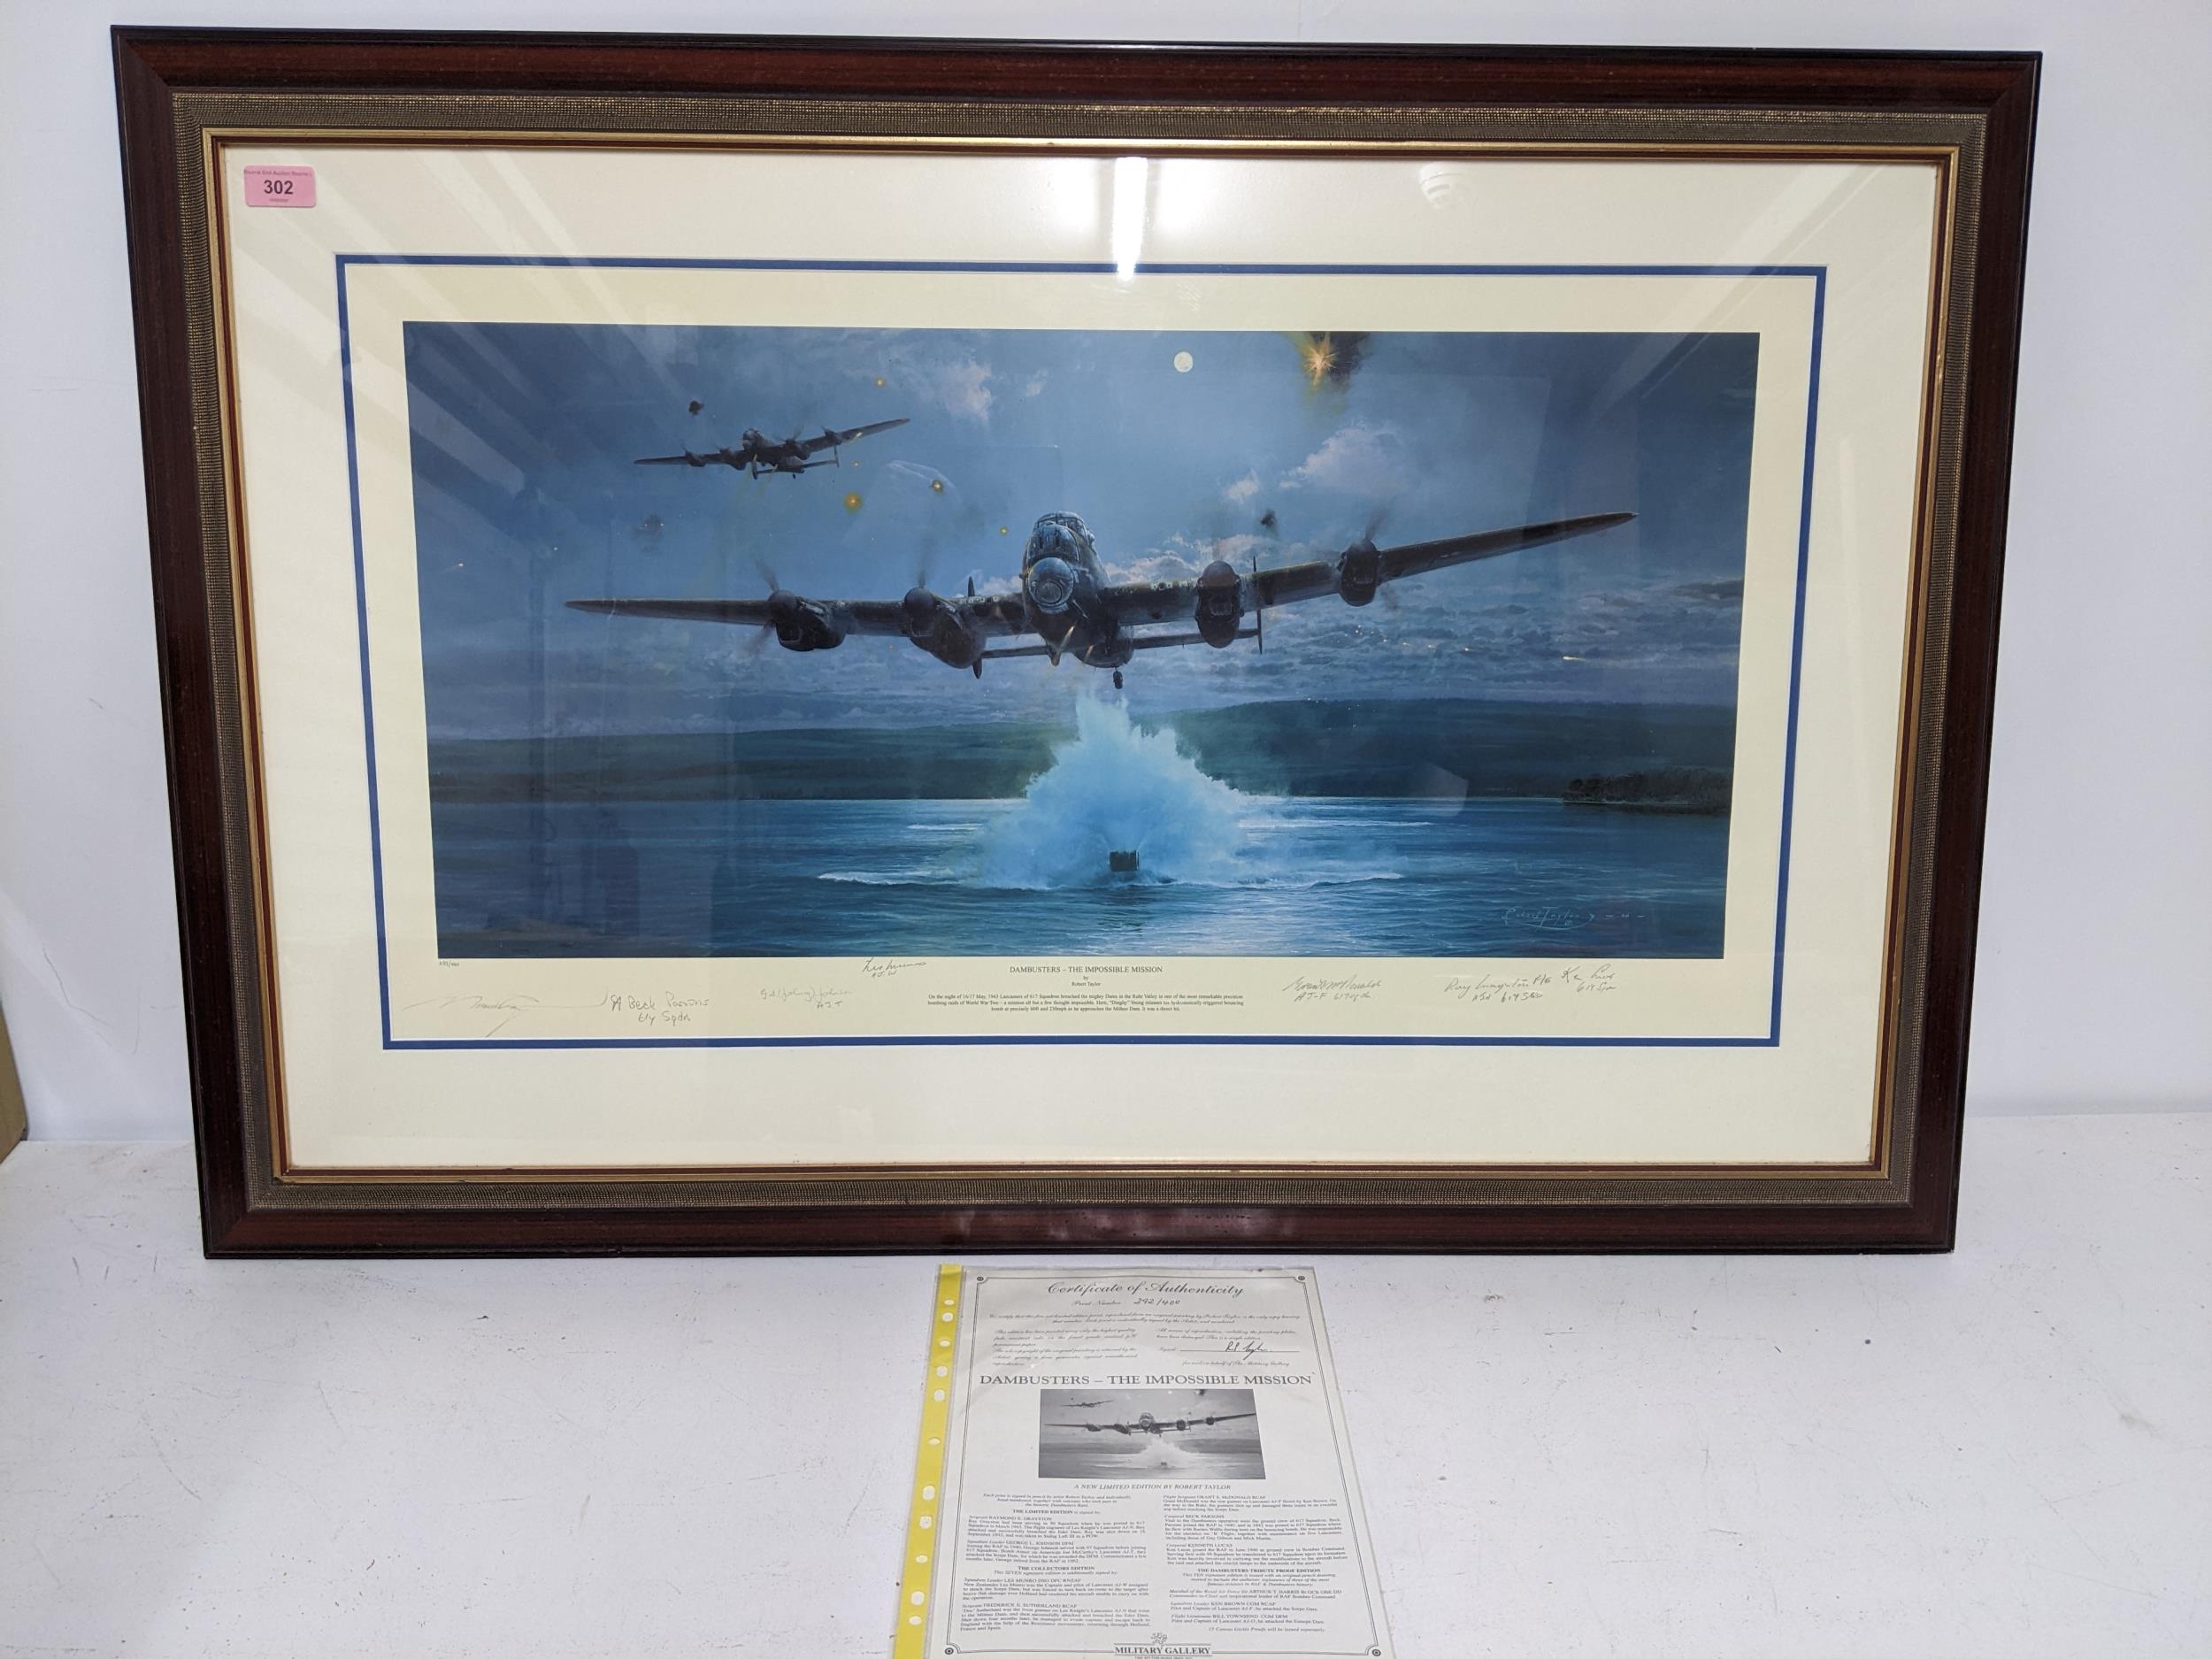 Robert Taylor -Dambusters - The Impossible Mission, the collectors edition, a limited edition